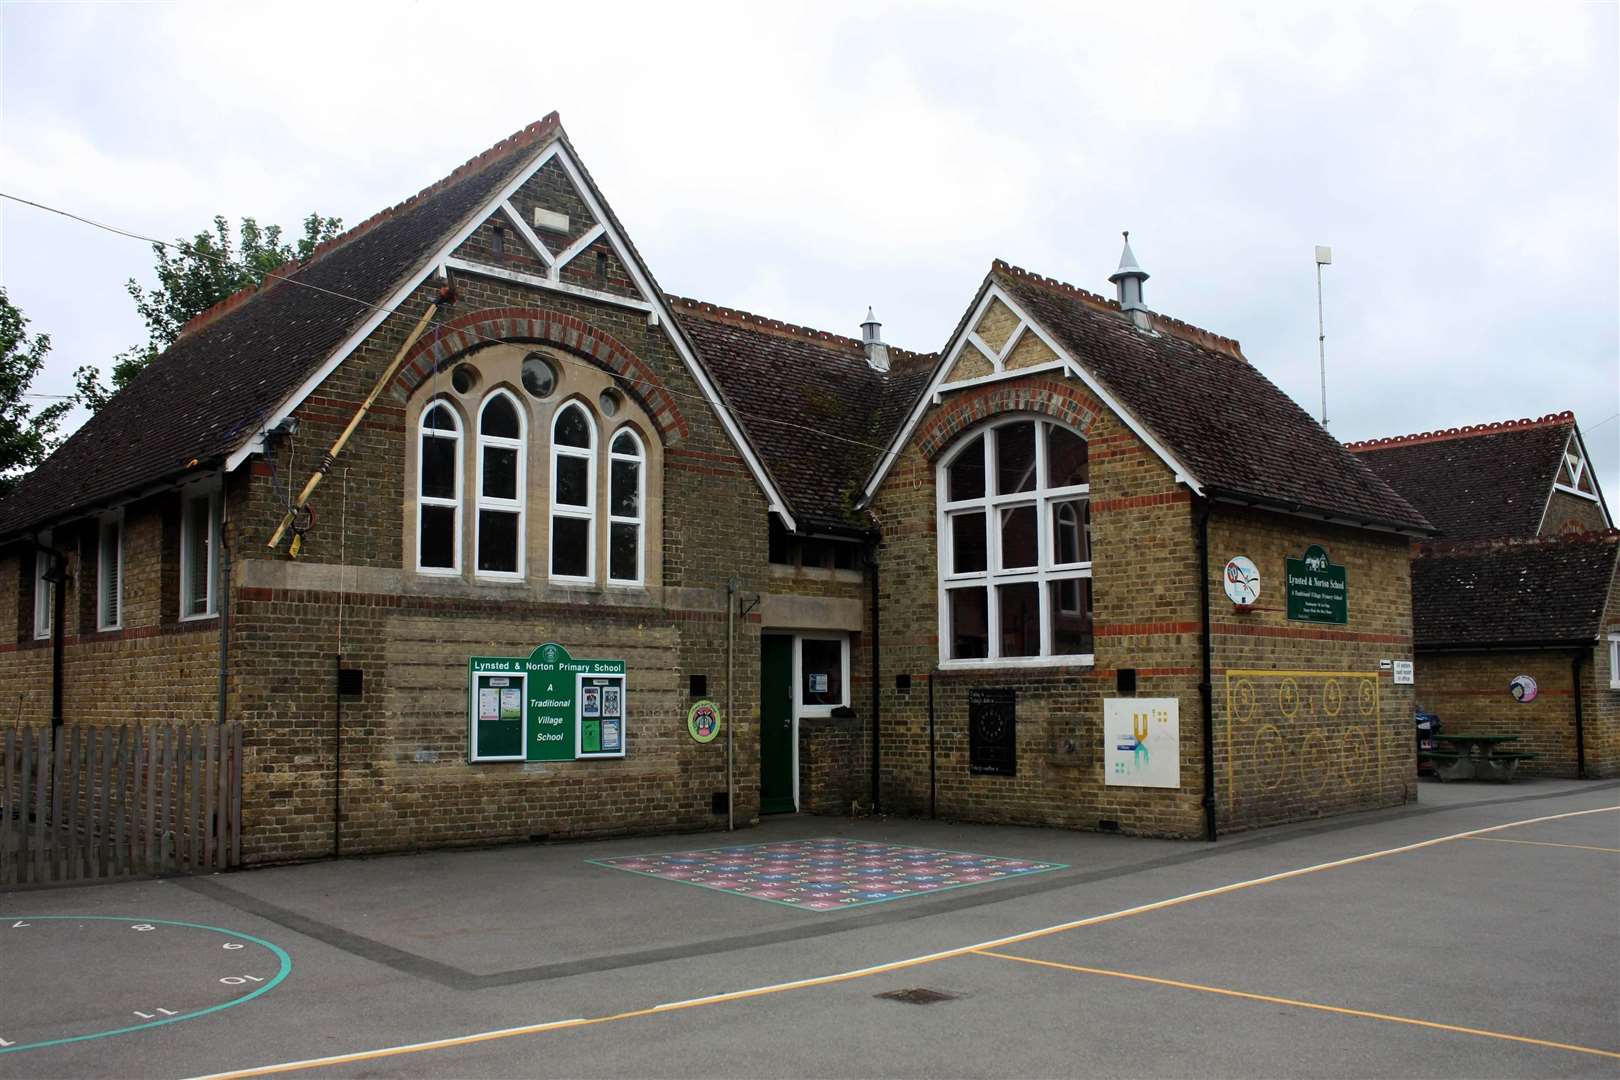 Lynsted and Norton Primary School, near Sittingbourne